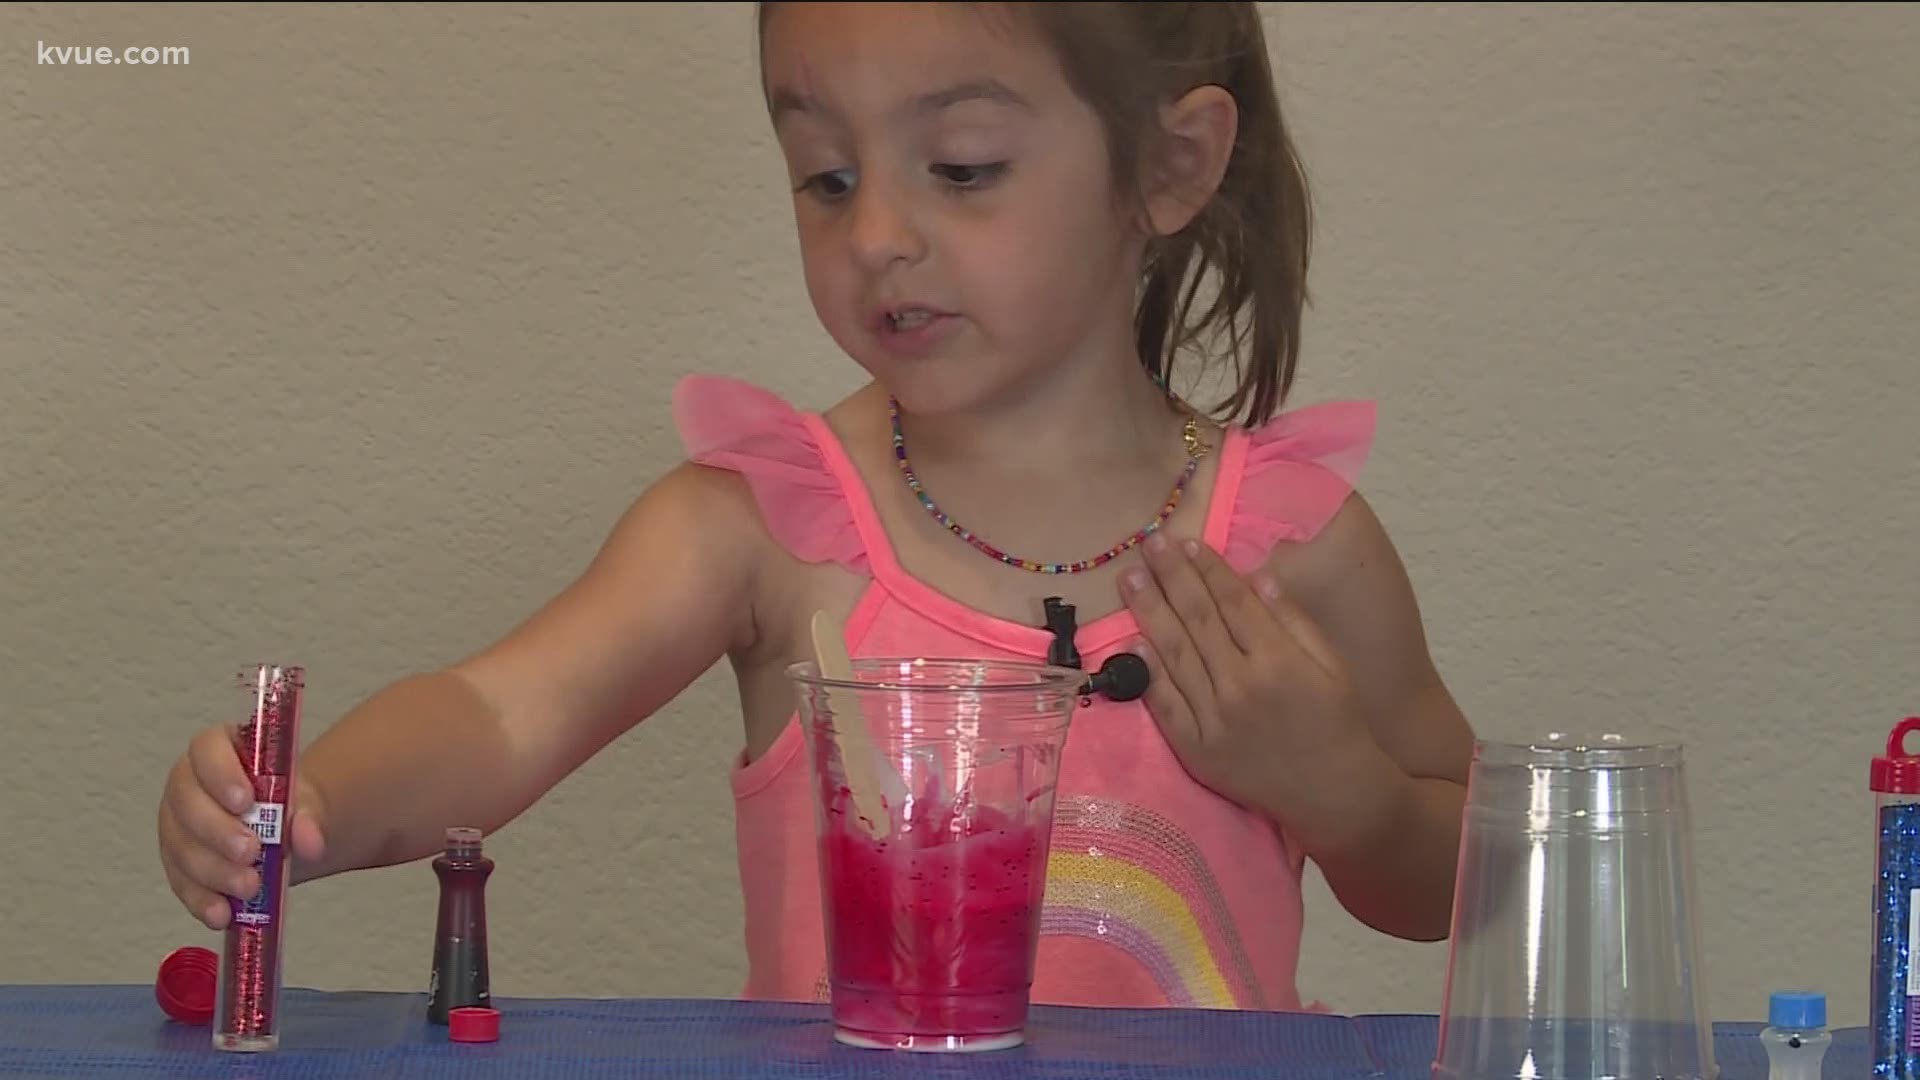 Every Wednesday, Cultural Reporter Brittany Flowers and her daughter walk us through crafts and activities to keep kids busy. This time: making Fourth of July slime.